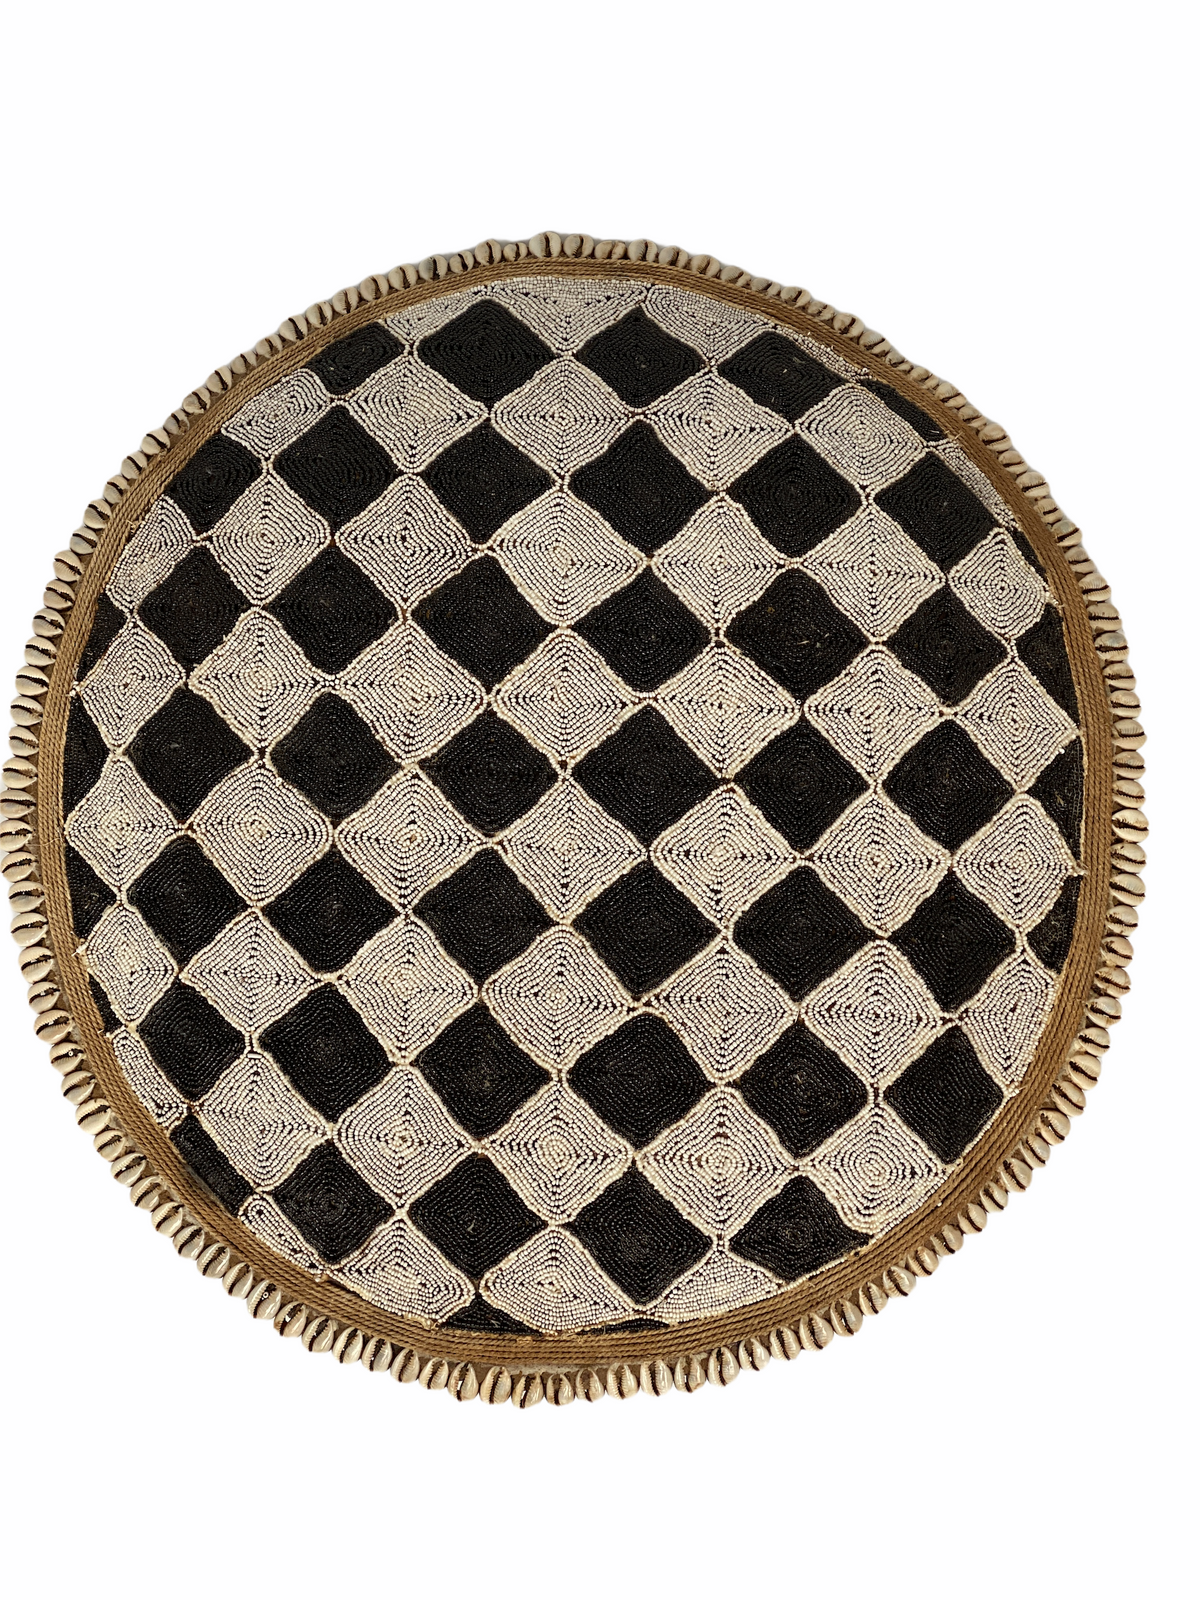 Cameroon Beaded Shield CW07- L - 55cm black and white